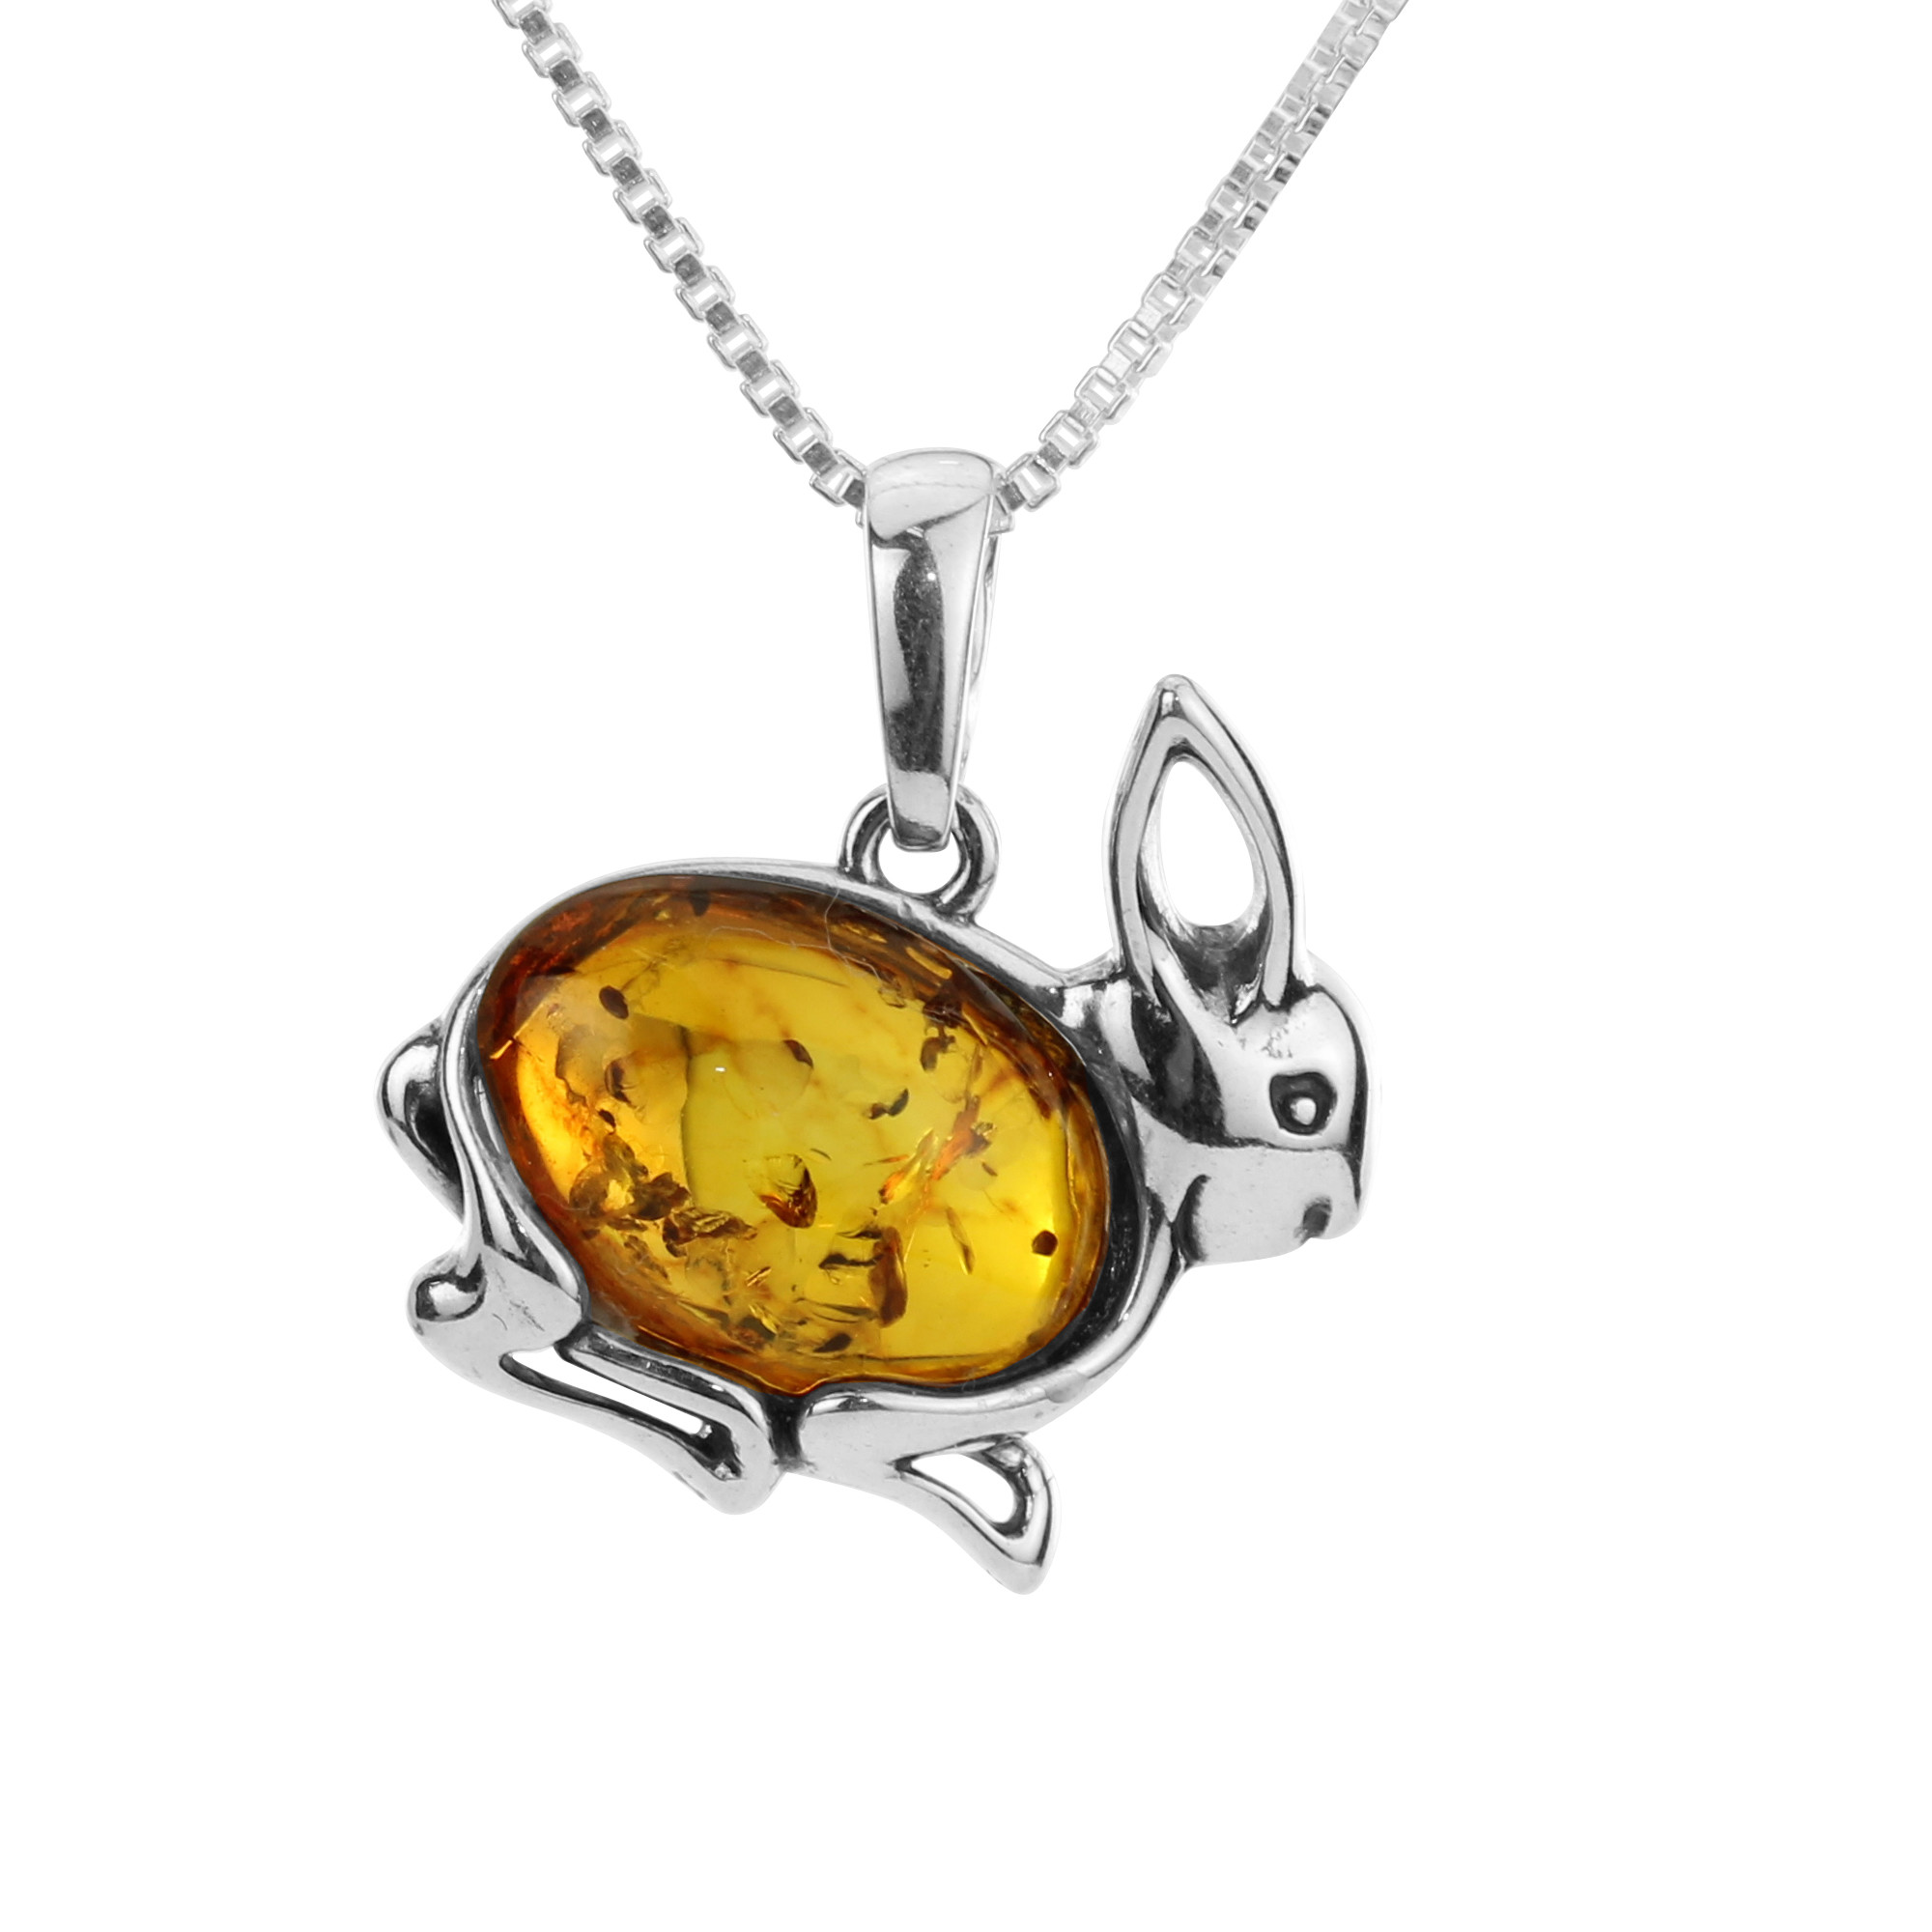 BALTIC AMBER AND STERLING SILVER 925 RABBIT PENDANT NECKLACE 14 16 18 20 22 24 26 28 30 32 34 1mm ITALIAN SNAKE CHAIN